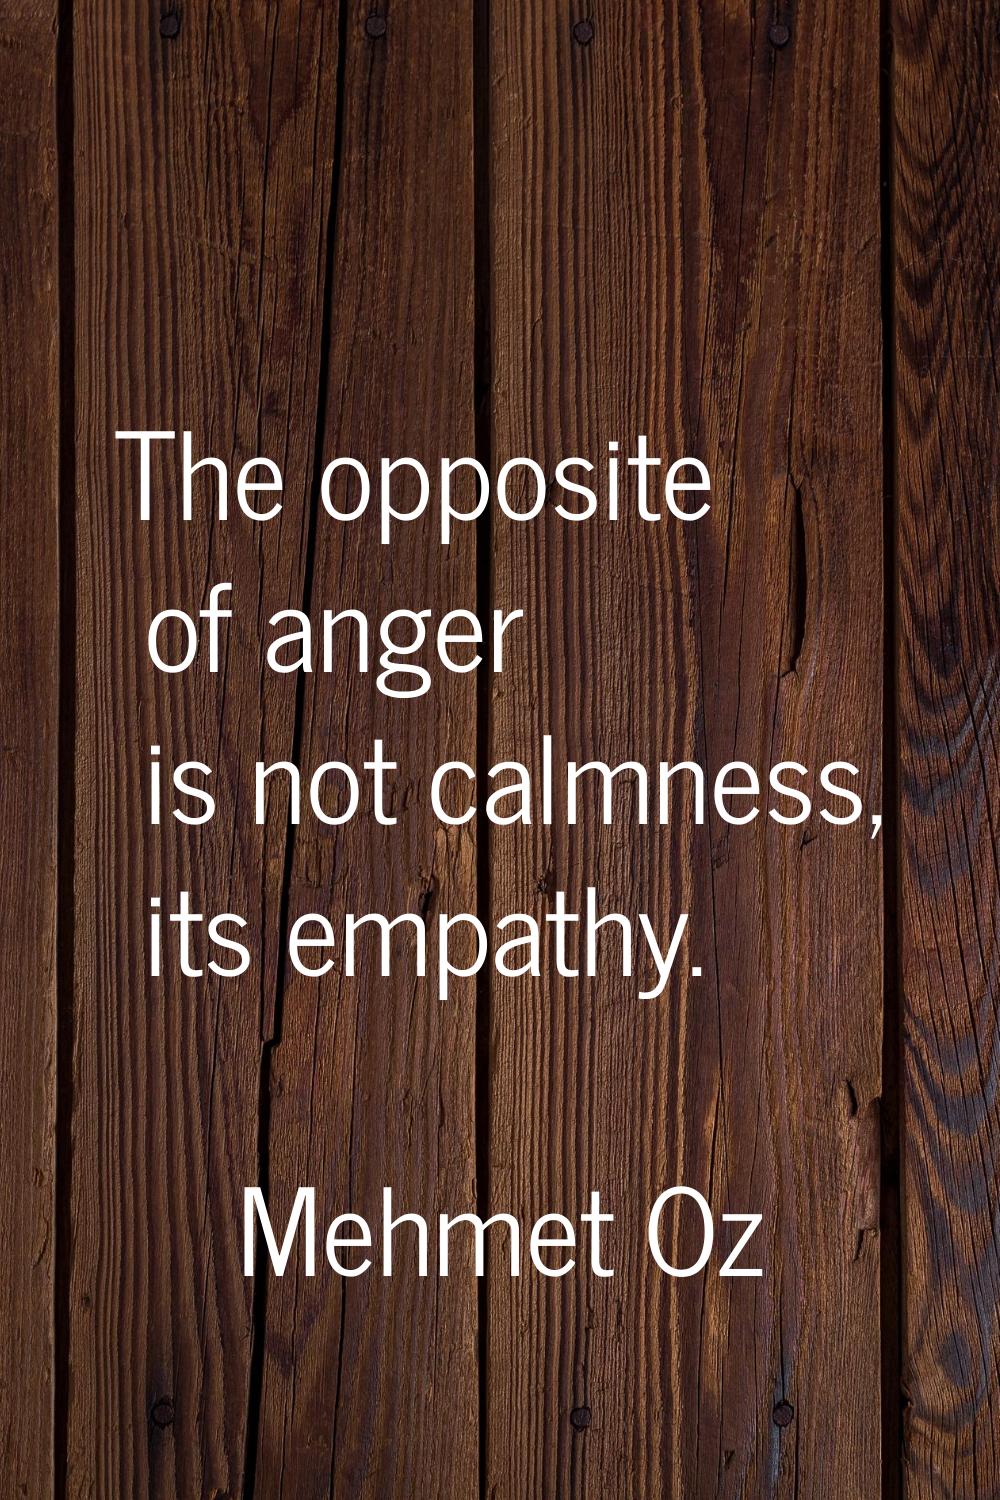 The opposite of anger is not calmness, its empathy.